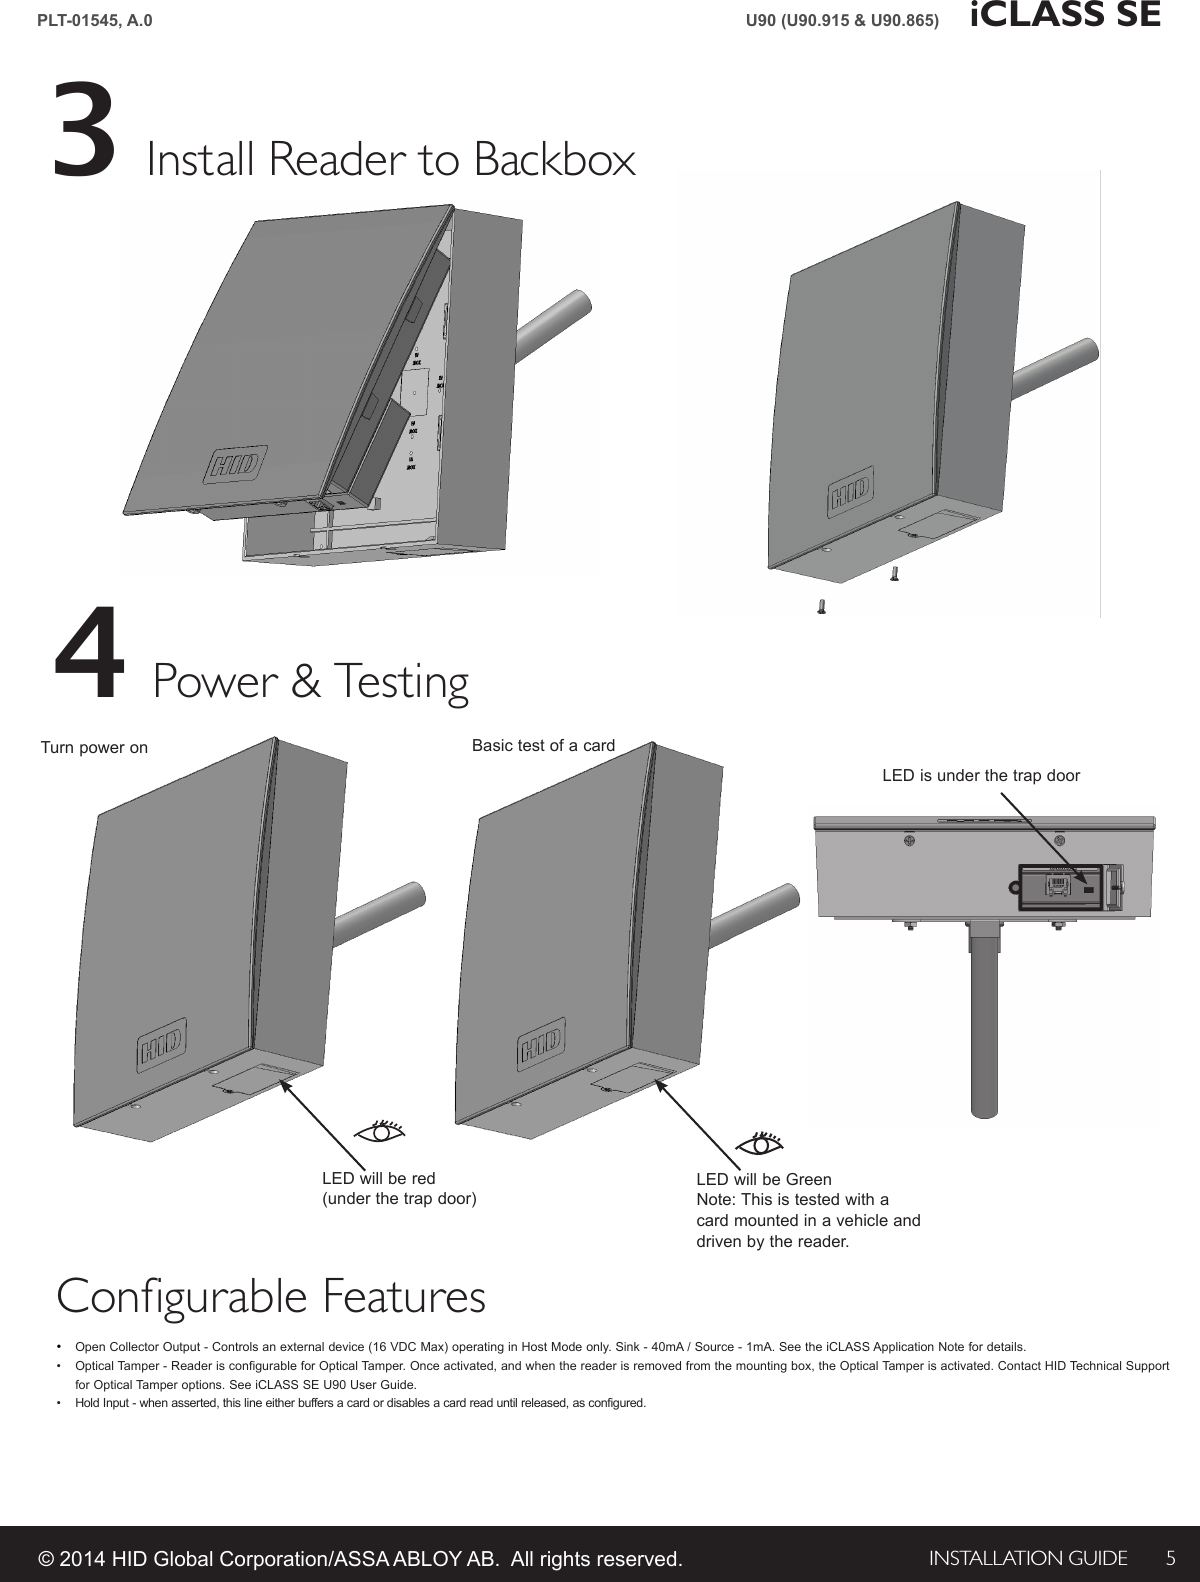 INSTALLATION GUIDE 5PLT-01545, A.0 iCLASS SEU90 (U90.915 &amp; U90.865)© 2014 HID Global Corporation/ASSA ABLOY AB.  All rights reserved.Install Reader to Backbox3Power &amp; Testing4Basic test of a cardTurn power onLED is under the trap doorLED will be GreenNote: This is tested with a card mounted in a vehicle and driven by the reader.LED will be red (under the trap door)Configurable Features•  Open Collector Output - Controls an external device (16 VDC Max) operating in Host Mode only. Sink - 40mA / Source - 1mA. See the iCLASS Application Note for details. •  Optical Tamper - Reader is configurable for Optical Tamper. Once activated, and when the reader is removed from the mounting box, the Optical Tamper is activated. Contact HID Technical Support for Optical Tamper options. See iCLASS SE U90 User Guide. •  Hold Input - when asserted, this line either buffers a card or disables a card read until released, as configured.